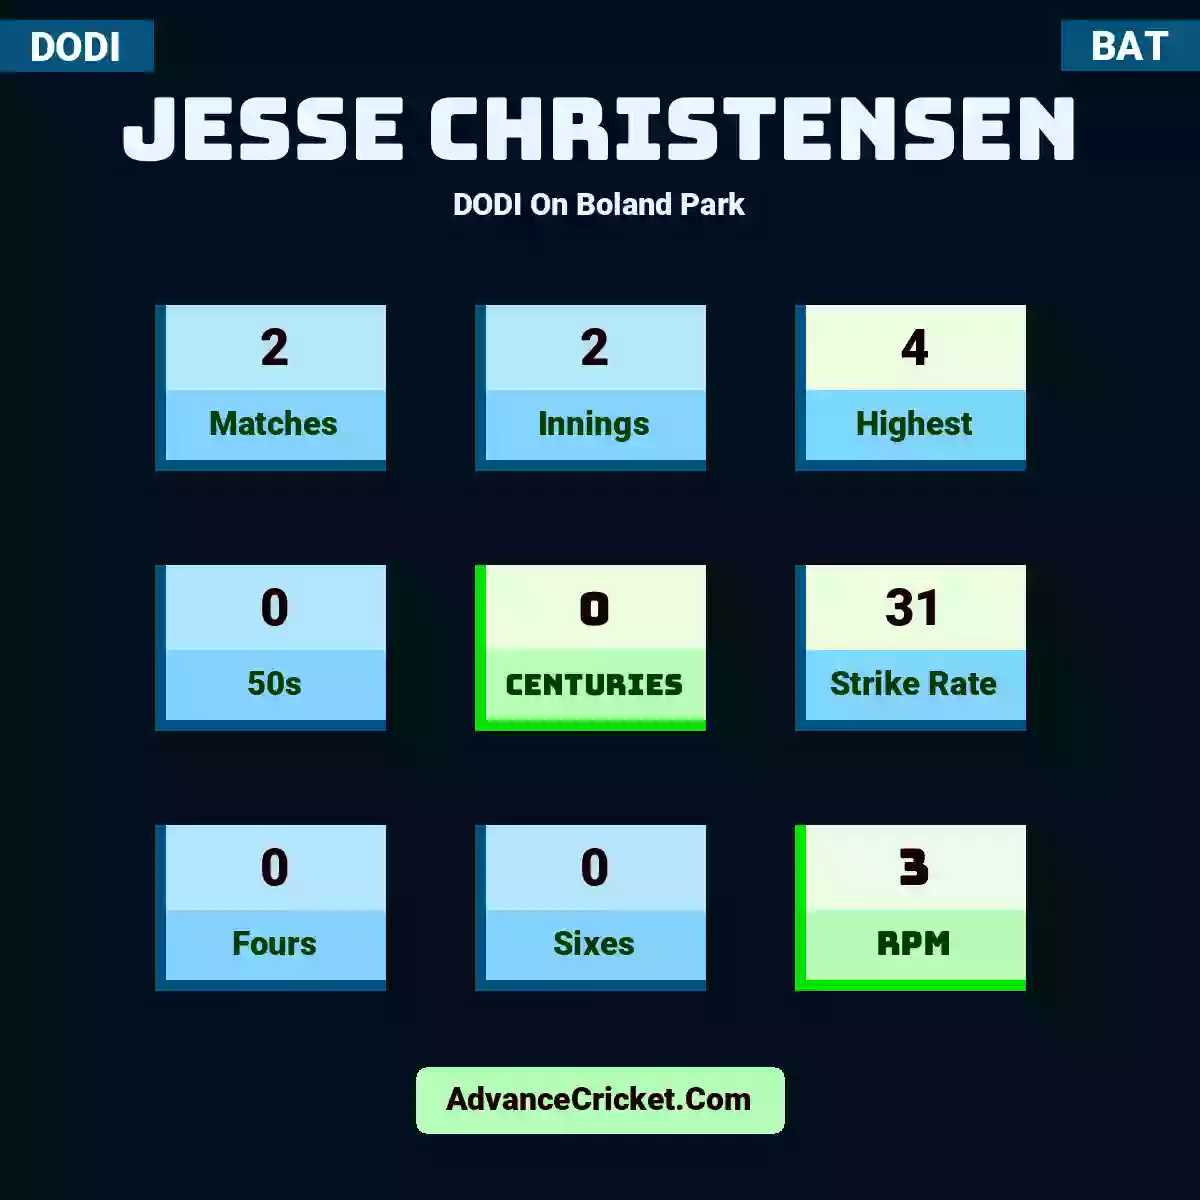 Jesse Christensen DODI  On Boland Park, Jesse Christensen played 2 matches, scored 4 runs as highest, 0 half-centuries, and 0 centuries, with a strike rate of 31. J.Christensen hit 0 fours and 0 sixes, with an RPM of 3.